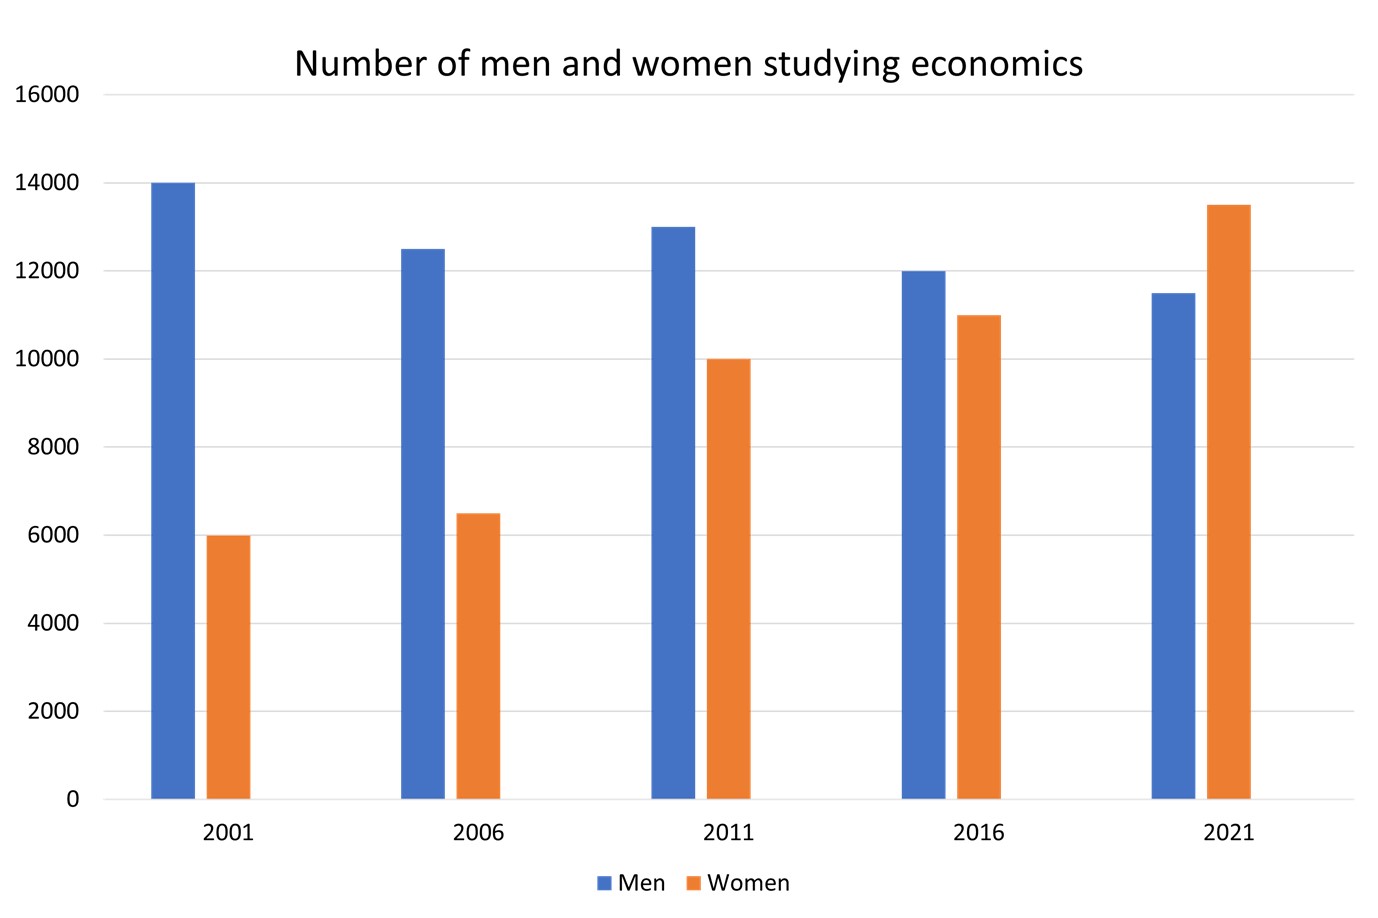 Bar chart showing the number of men and women studying economics at Canadian universities between 2001 and 2021 at 5-year intervals. It shows an upward trend in the number of female economic students while the number of male students seems to have levelled off.